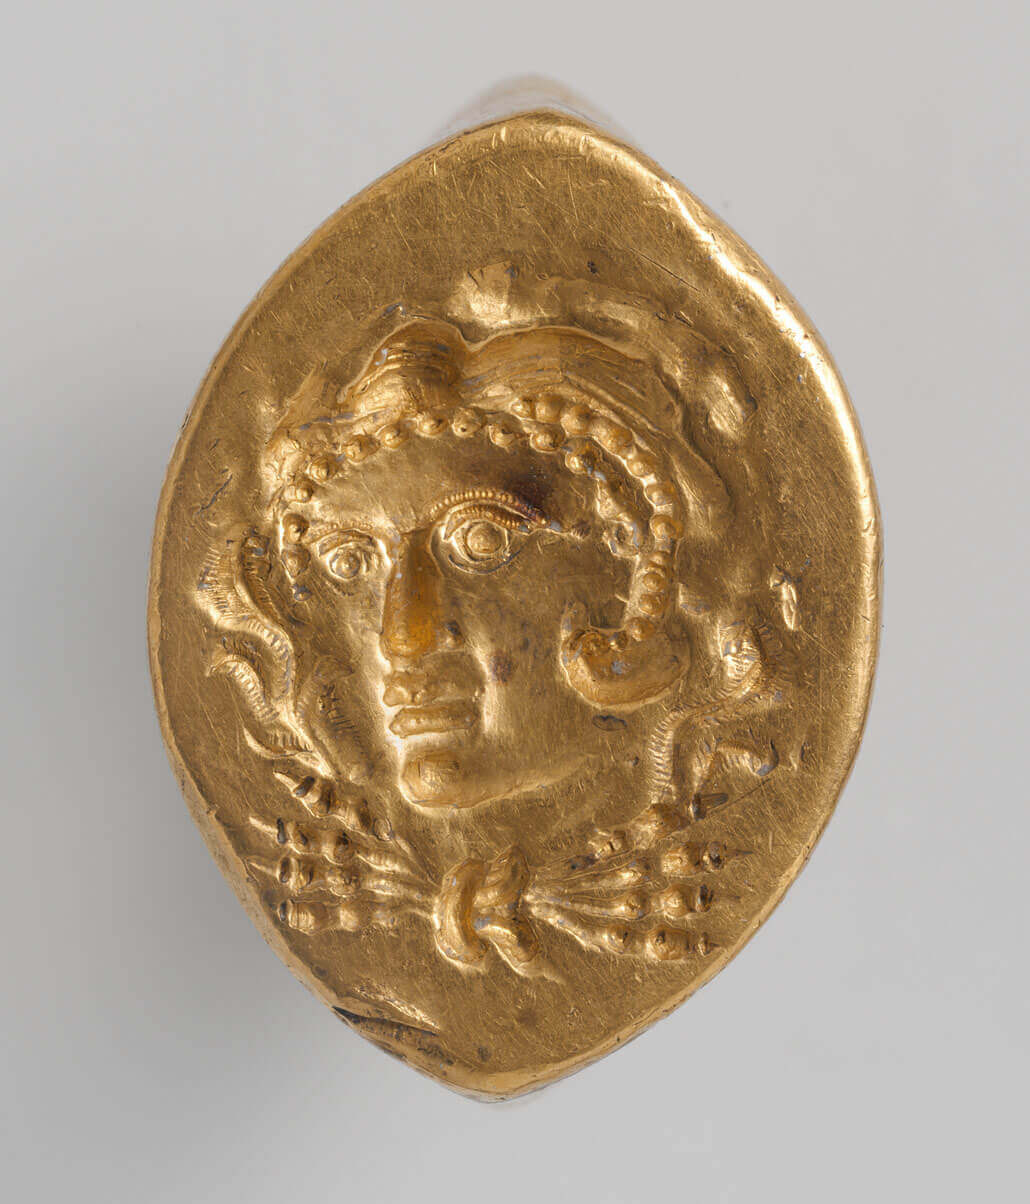 Gold Intaglio ring of Alexander the Great, late 4th-3rd Century BCE.